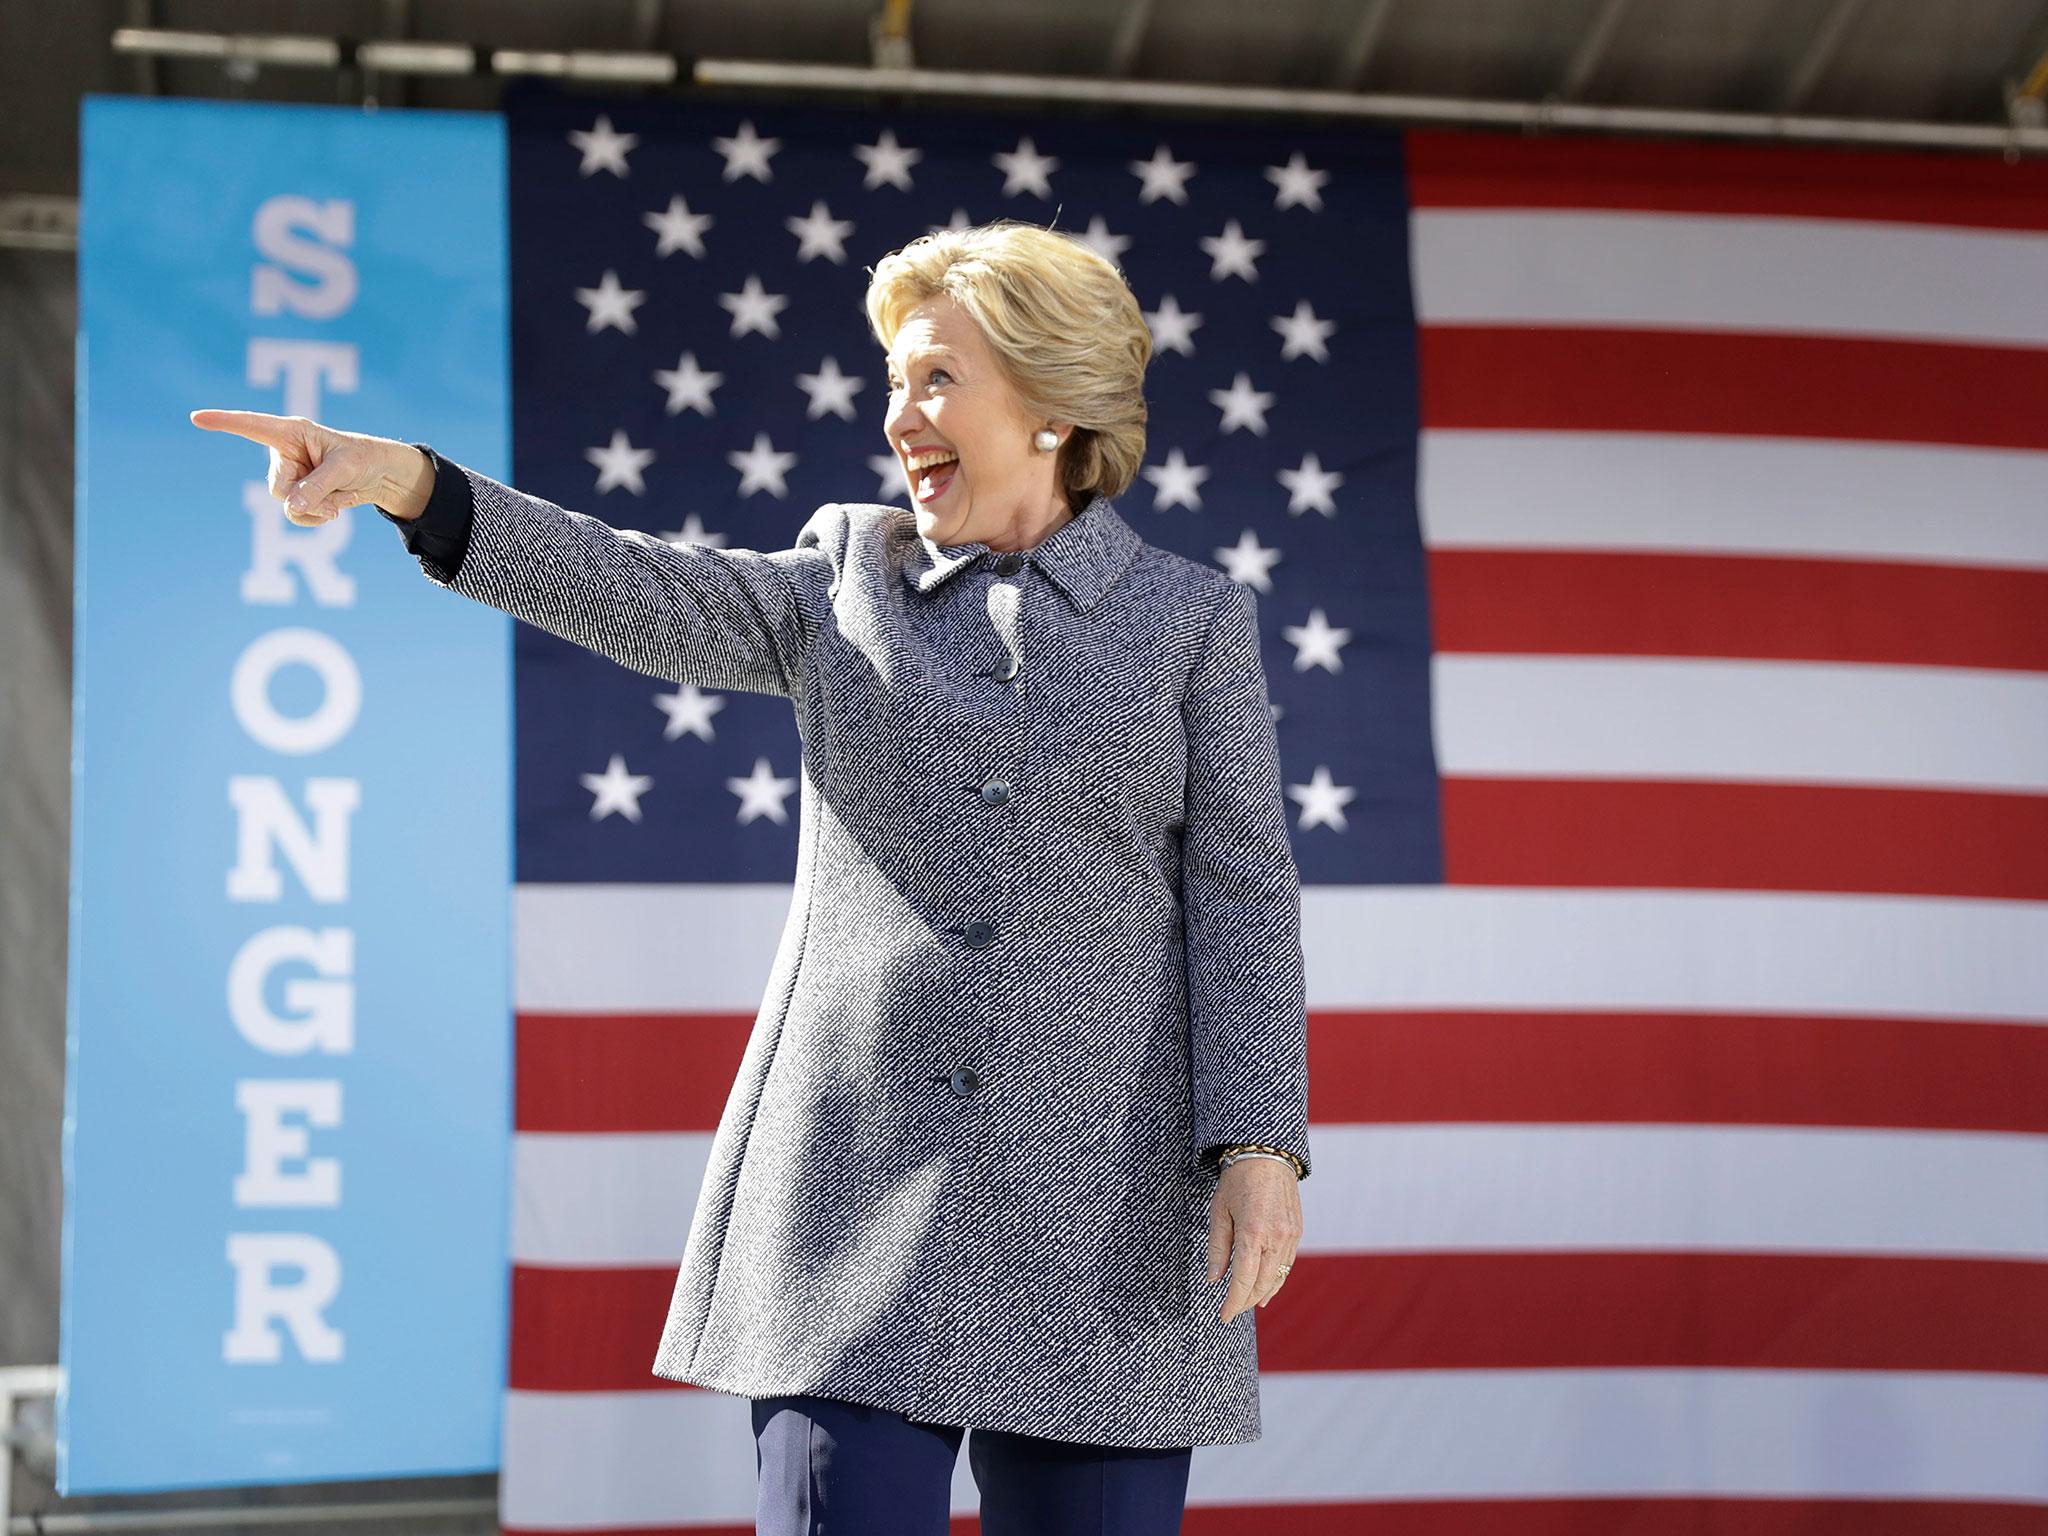 The presidential nominee takes the stage during a campaign stop in Iowa yesterday